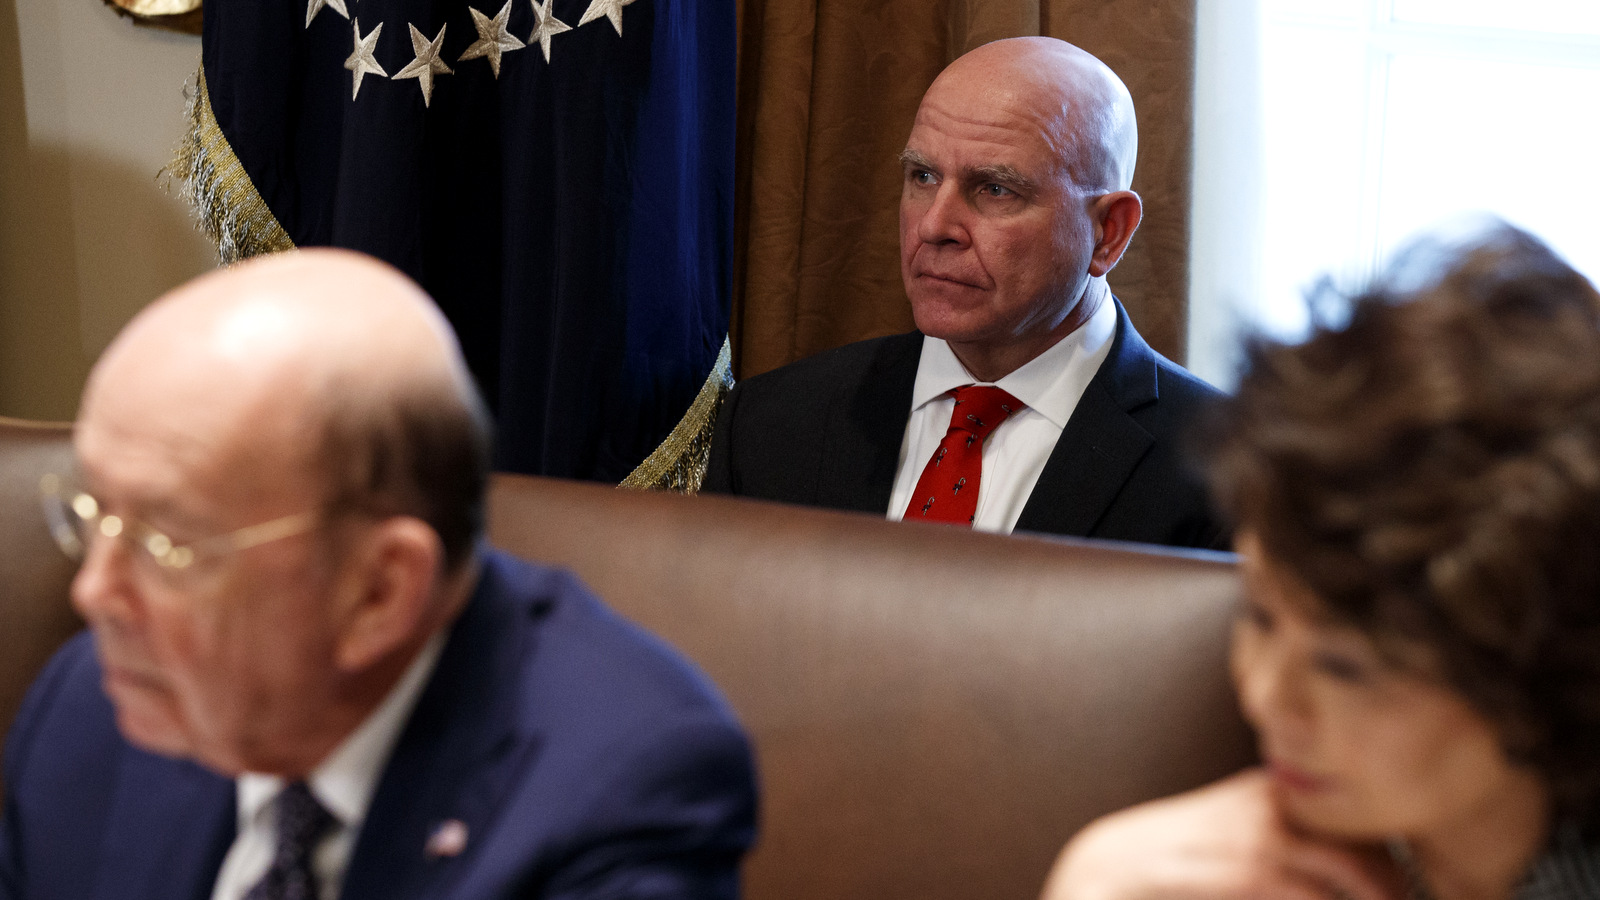 National Security Adviser H.R. McMaster listens as President Donald Trump speaks during a cabinet meeting at the White House, Dec. 20, 2017, in Washington. (AP/Evan Vucci)